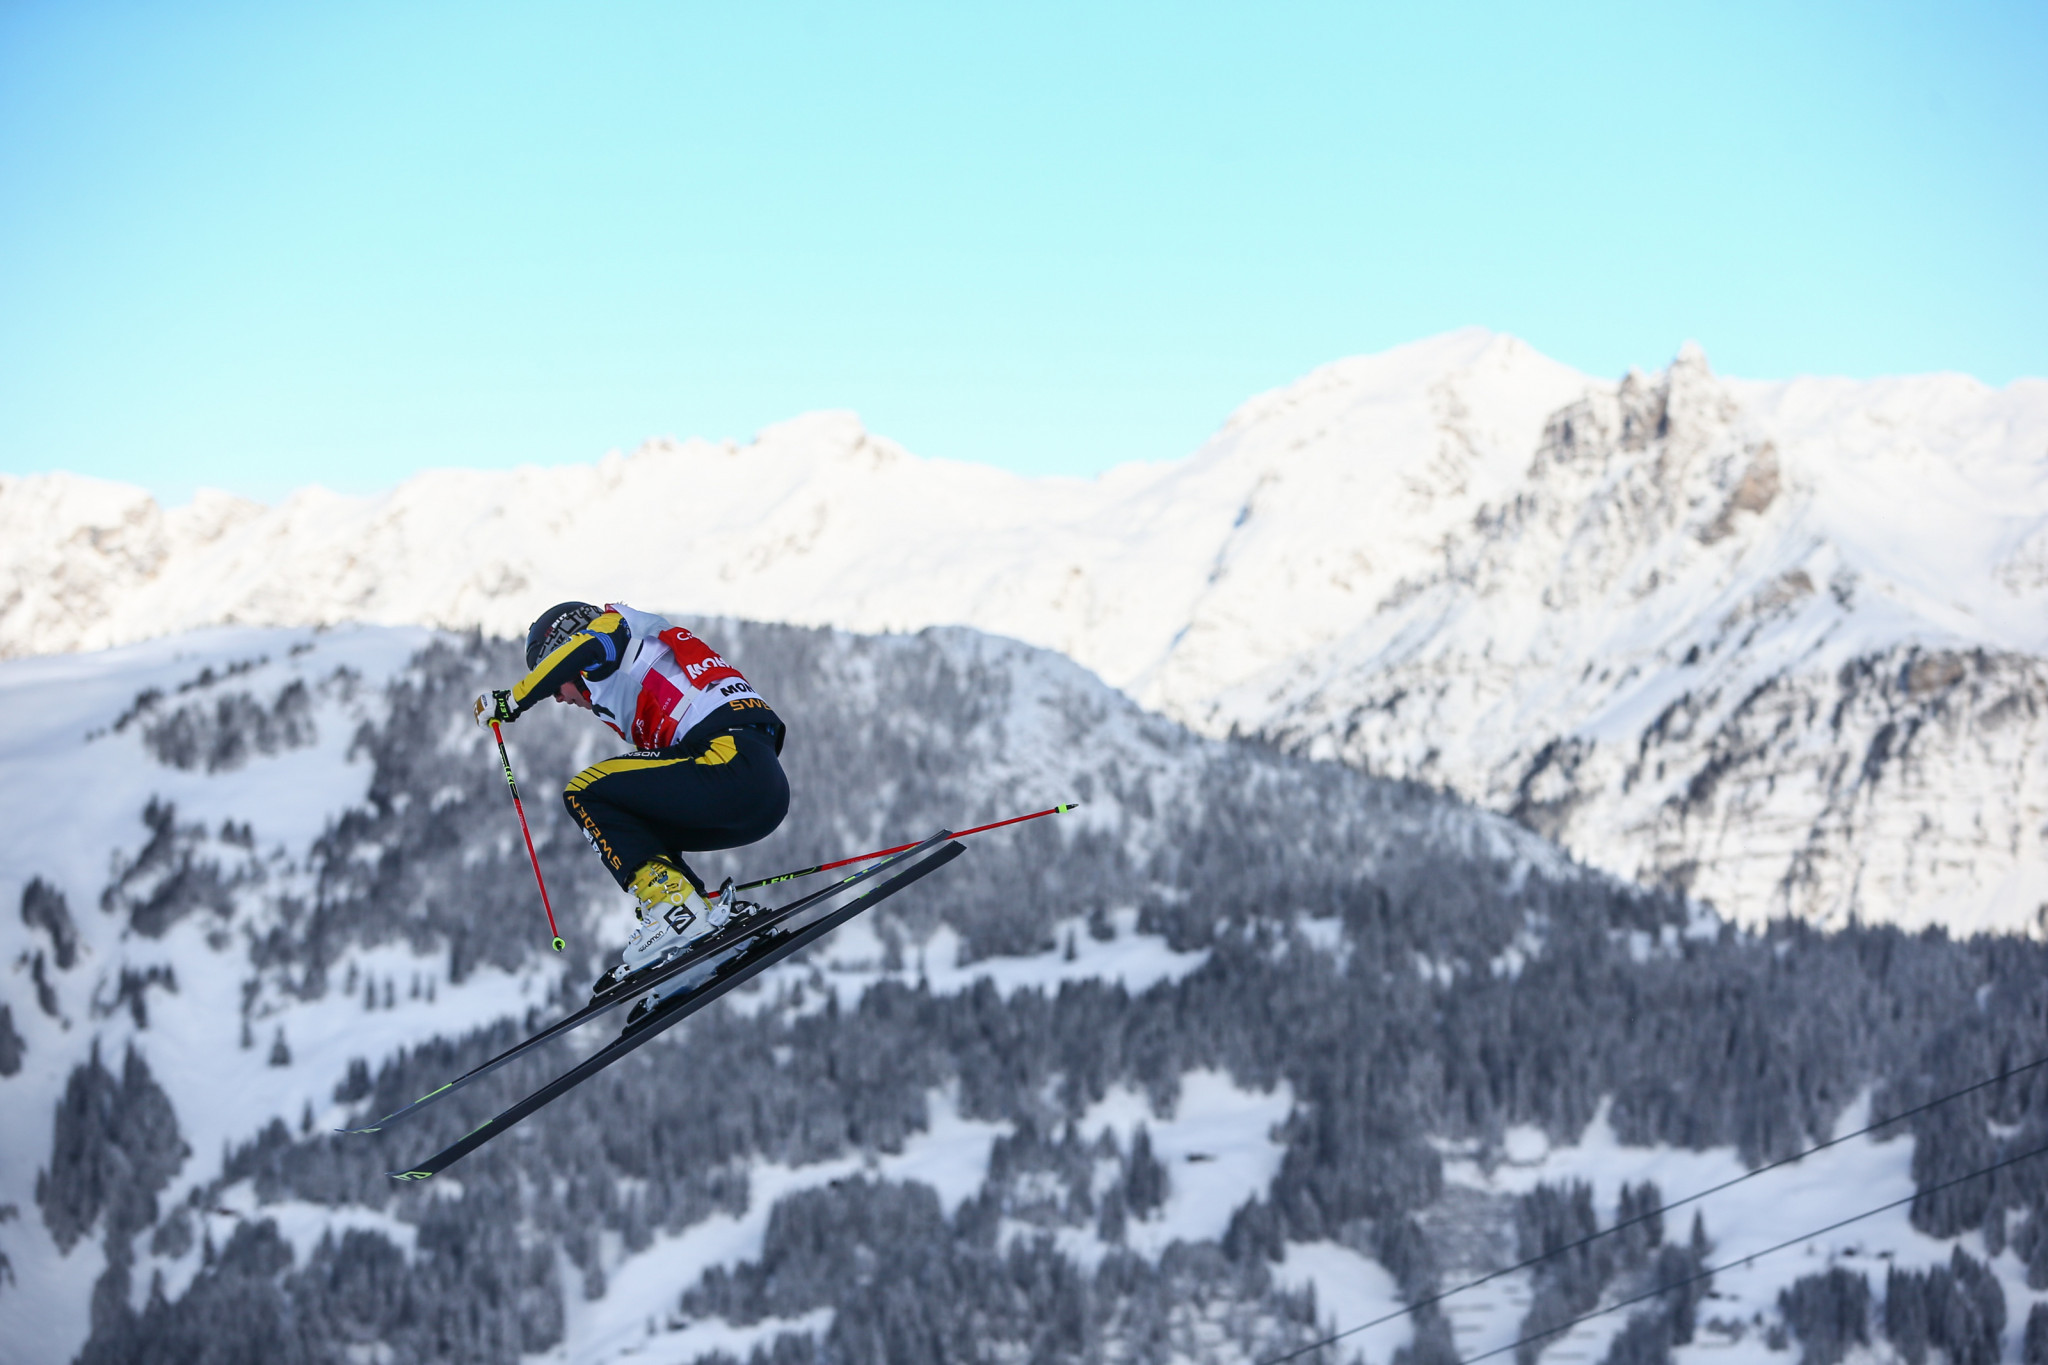 Sweden's Näslund keeps up good form on home snow in Freestyle Ski Cross World Cup